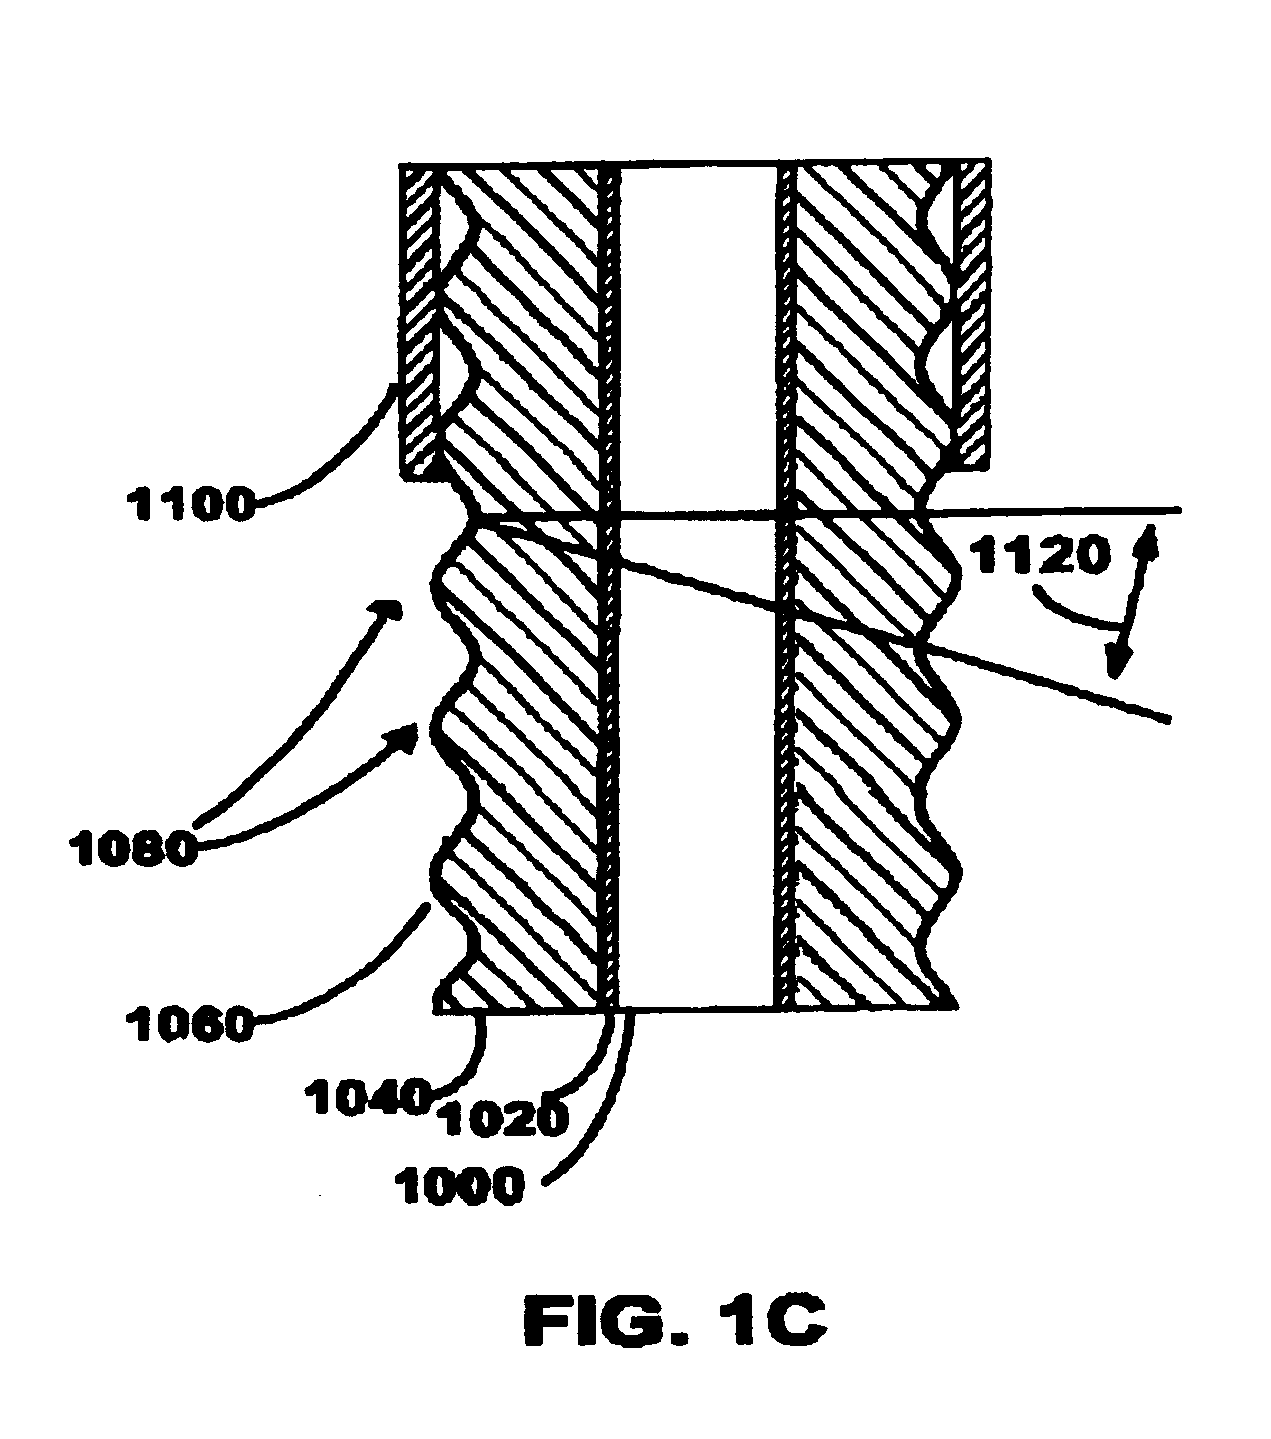 Method of manufacturing a high-performance, water blocking coaxial cable